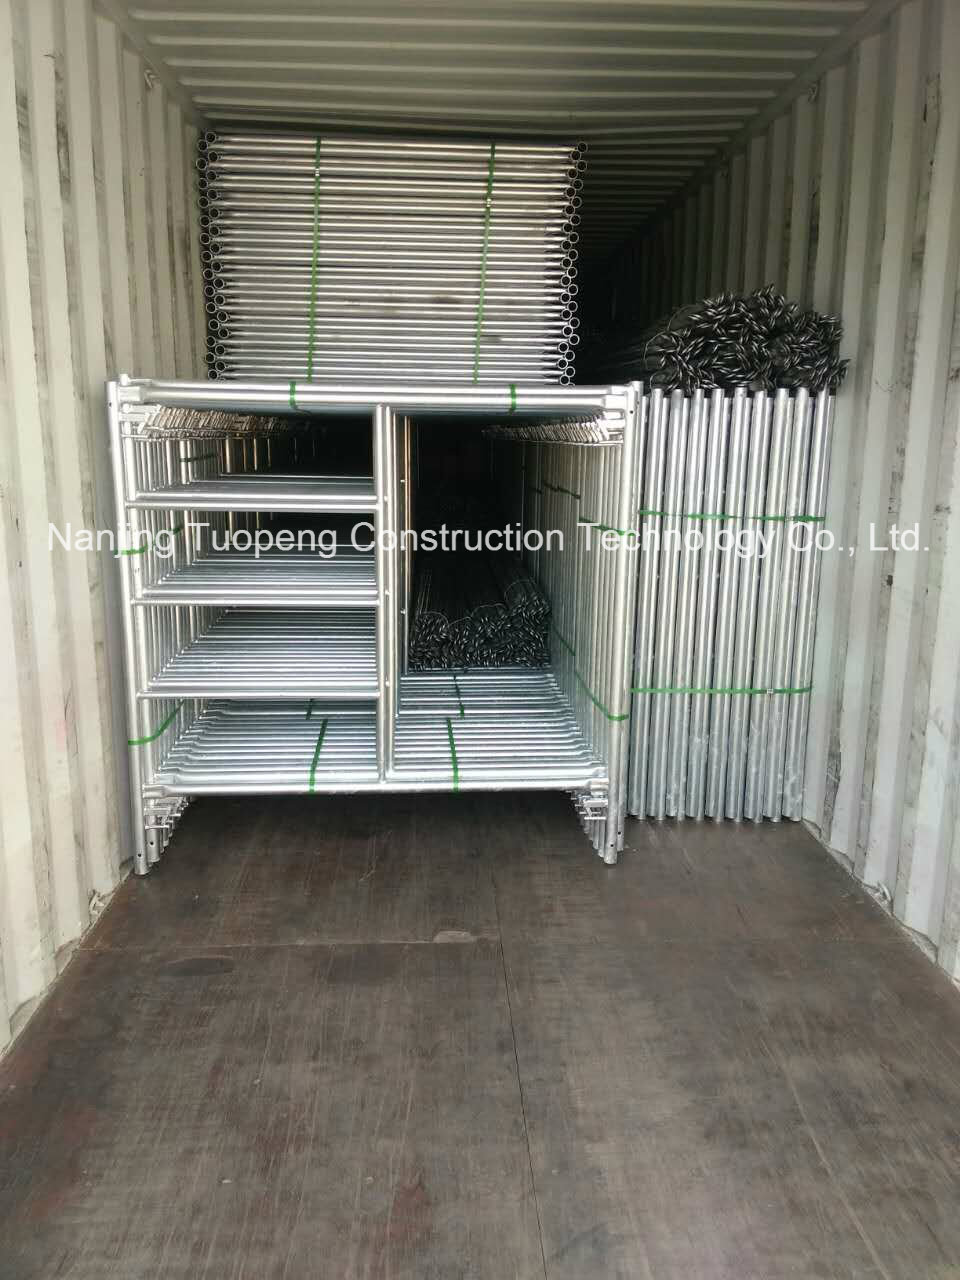 Masonry Frame Scaffolding System for Export